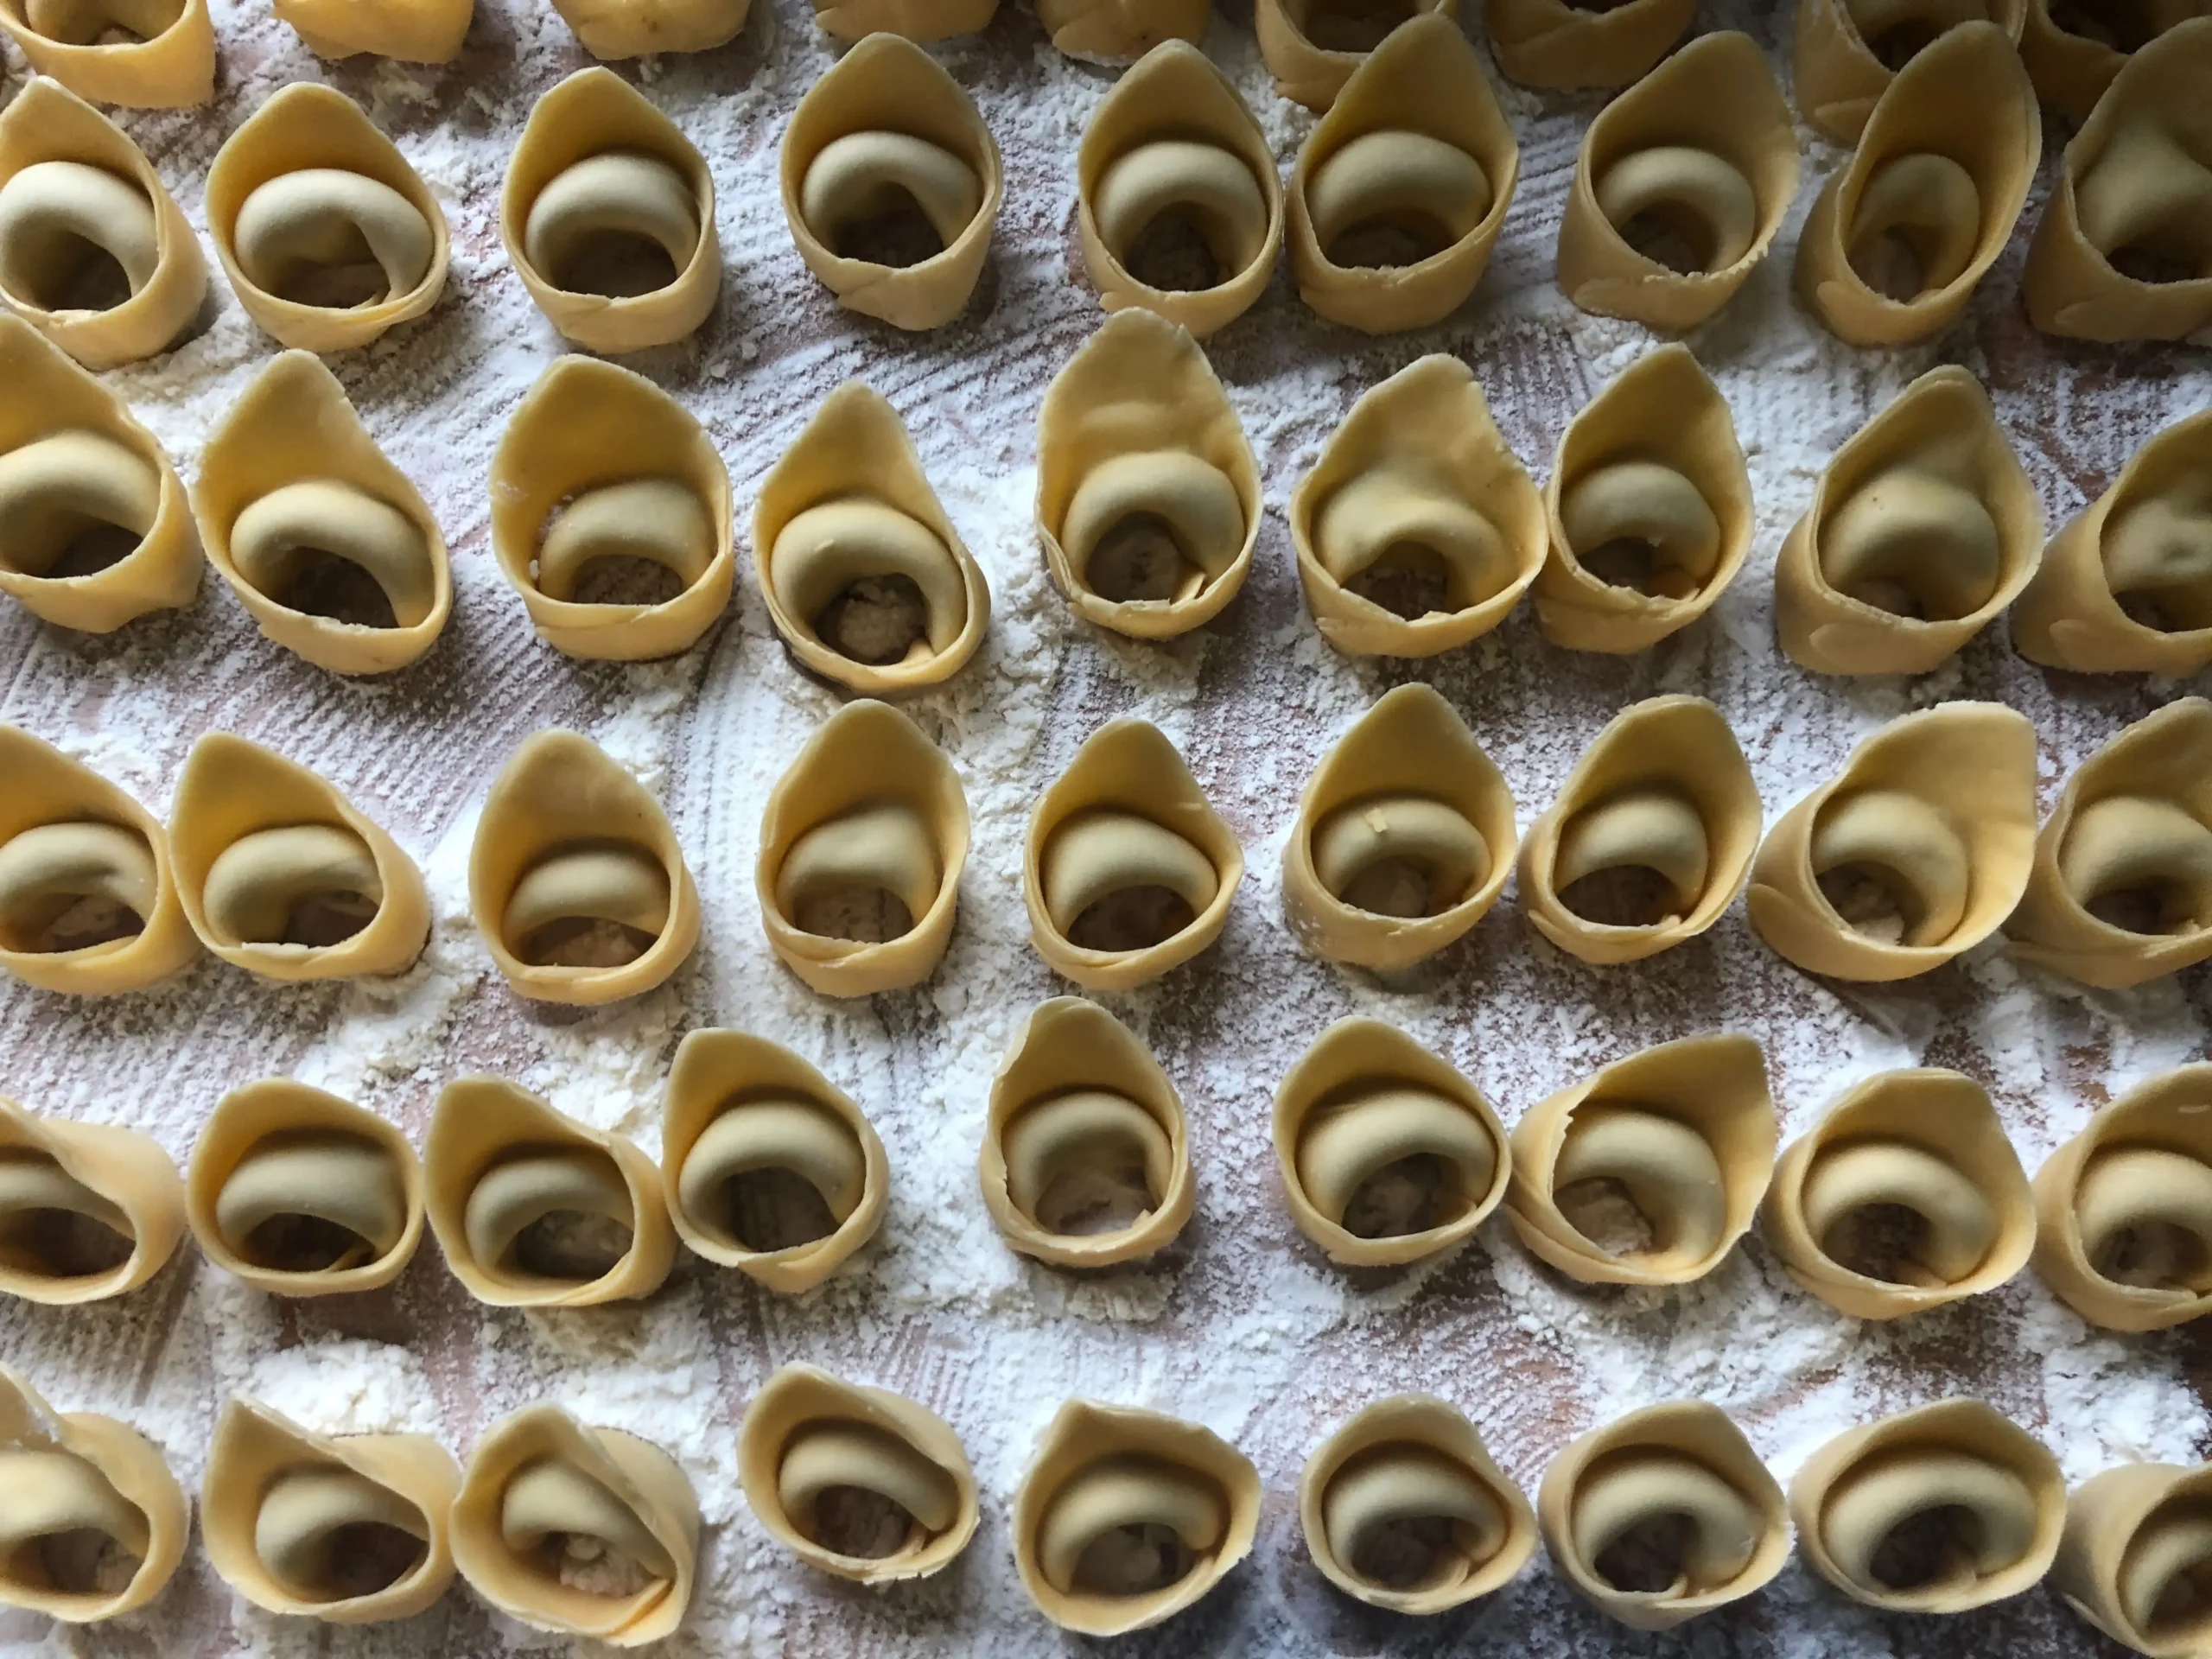 A table covered in flour and a type of fresh, handmade Italian stuffed pasta: tortellini.